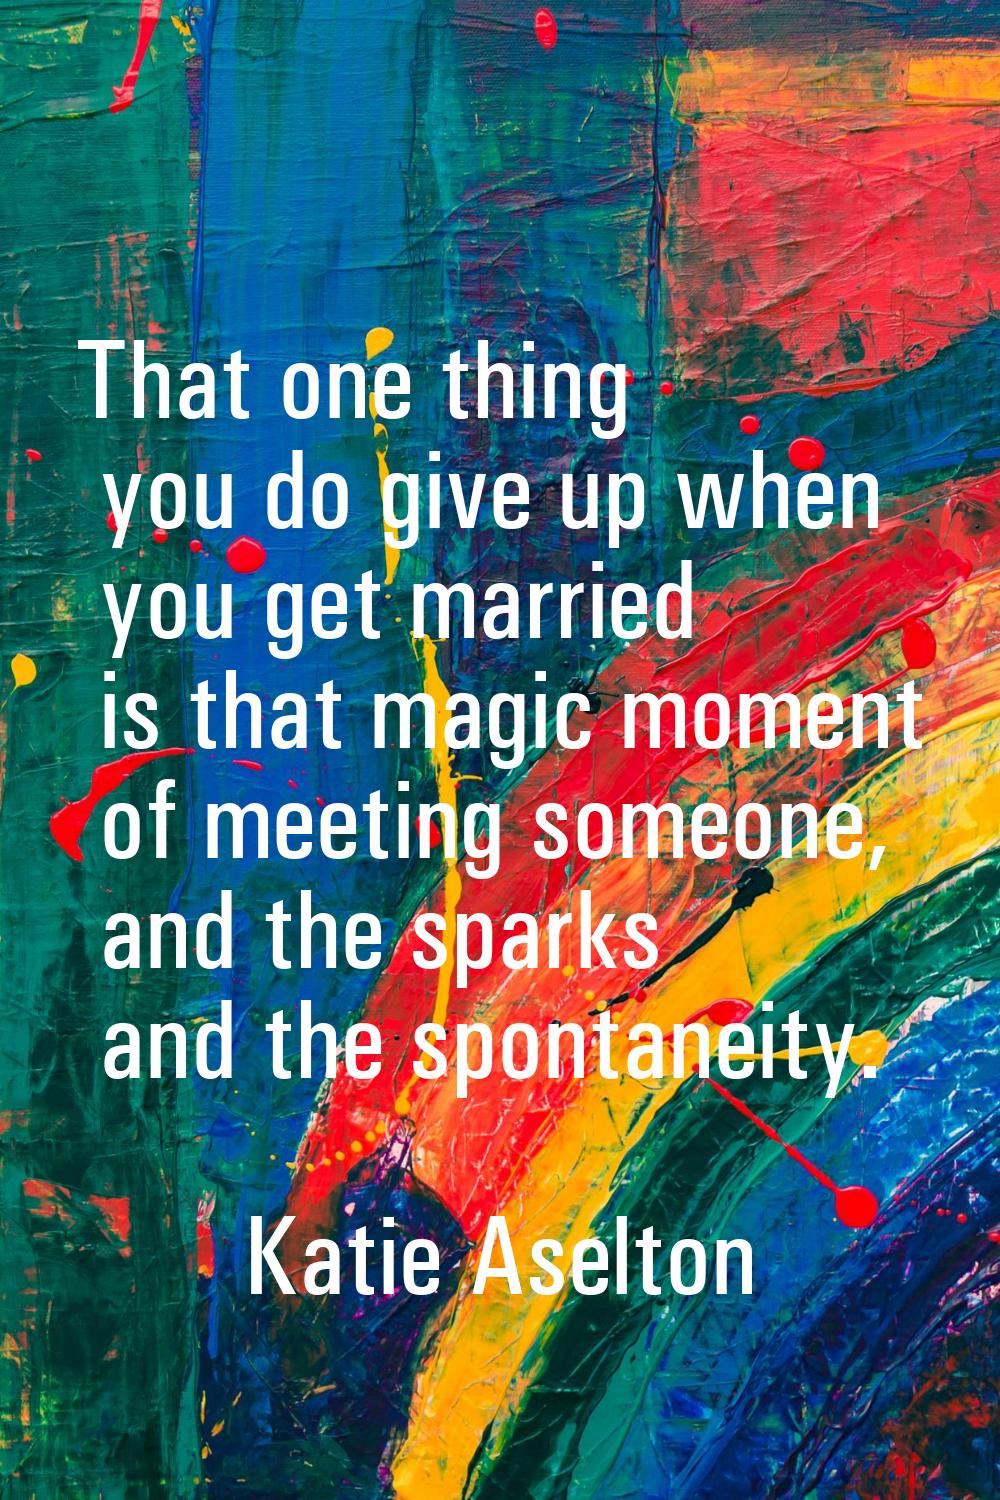 That one thing you do give up when you get married is that magic moment of meeting someone, and the